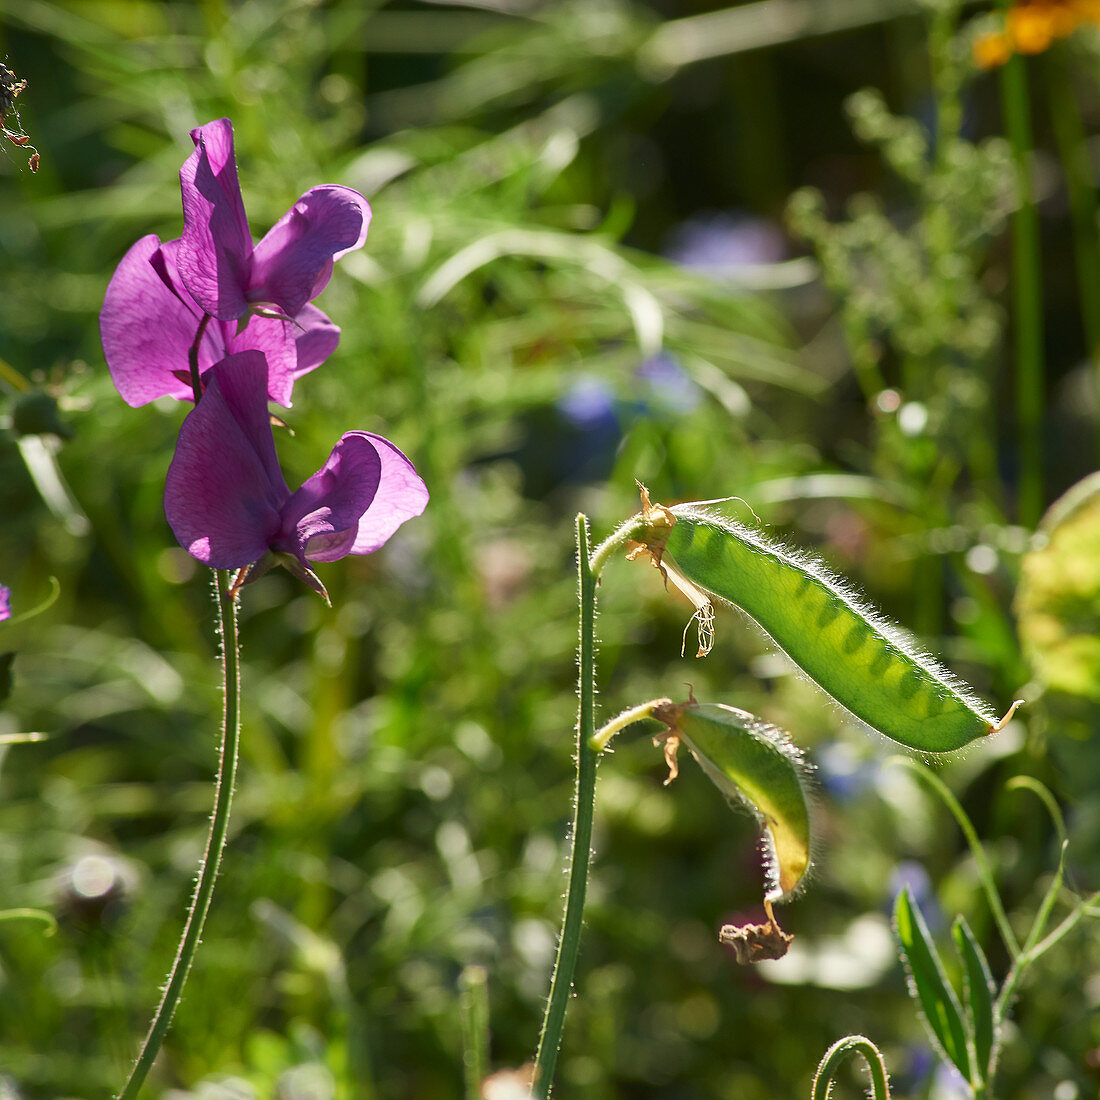 Sweet pea flower and seed pod